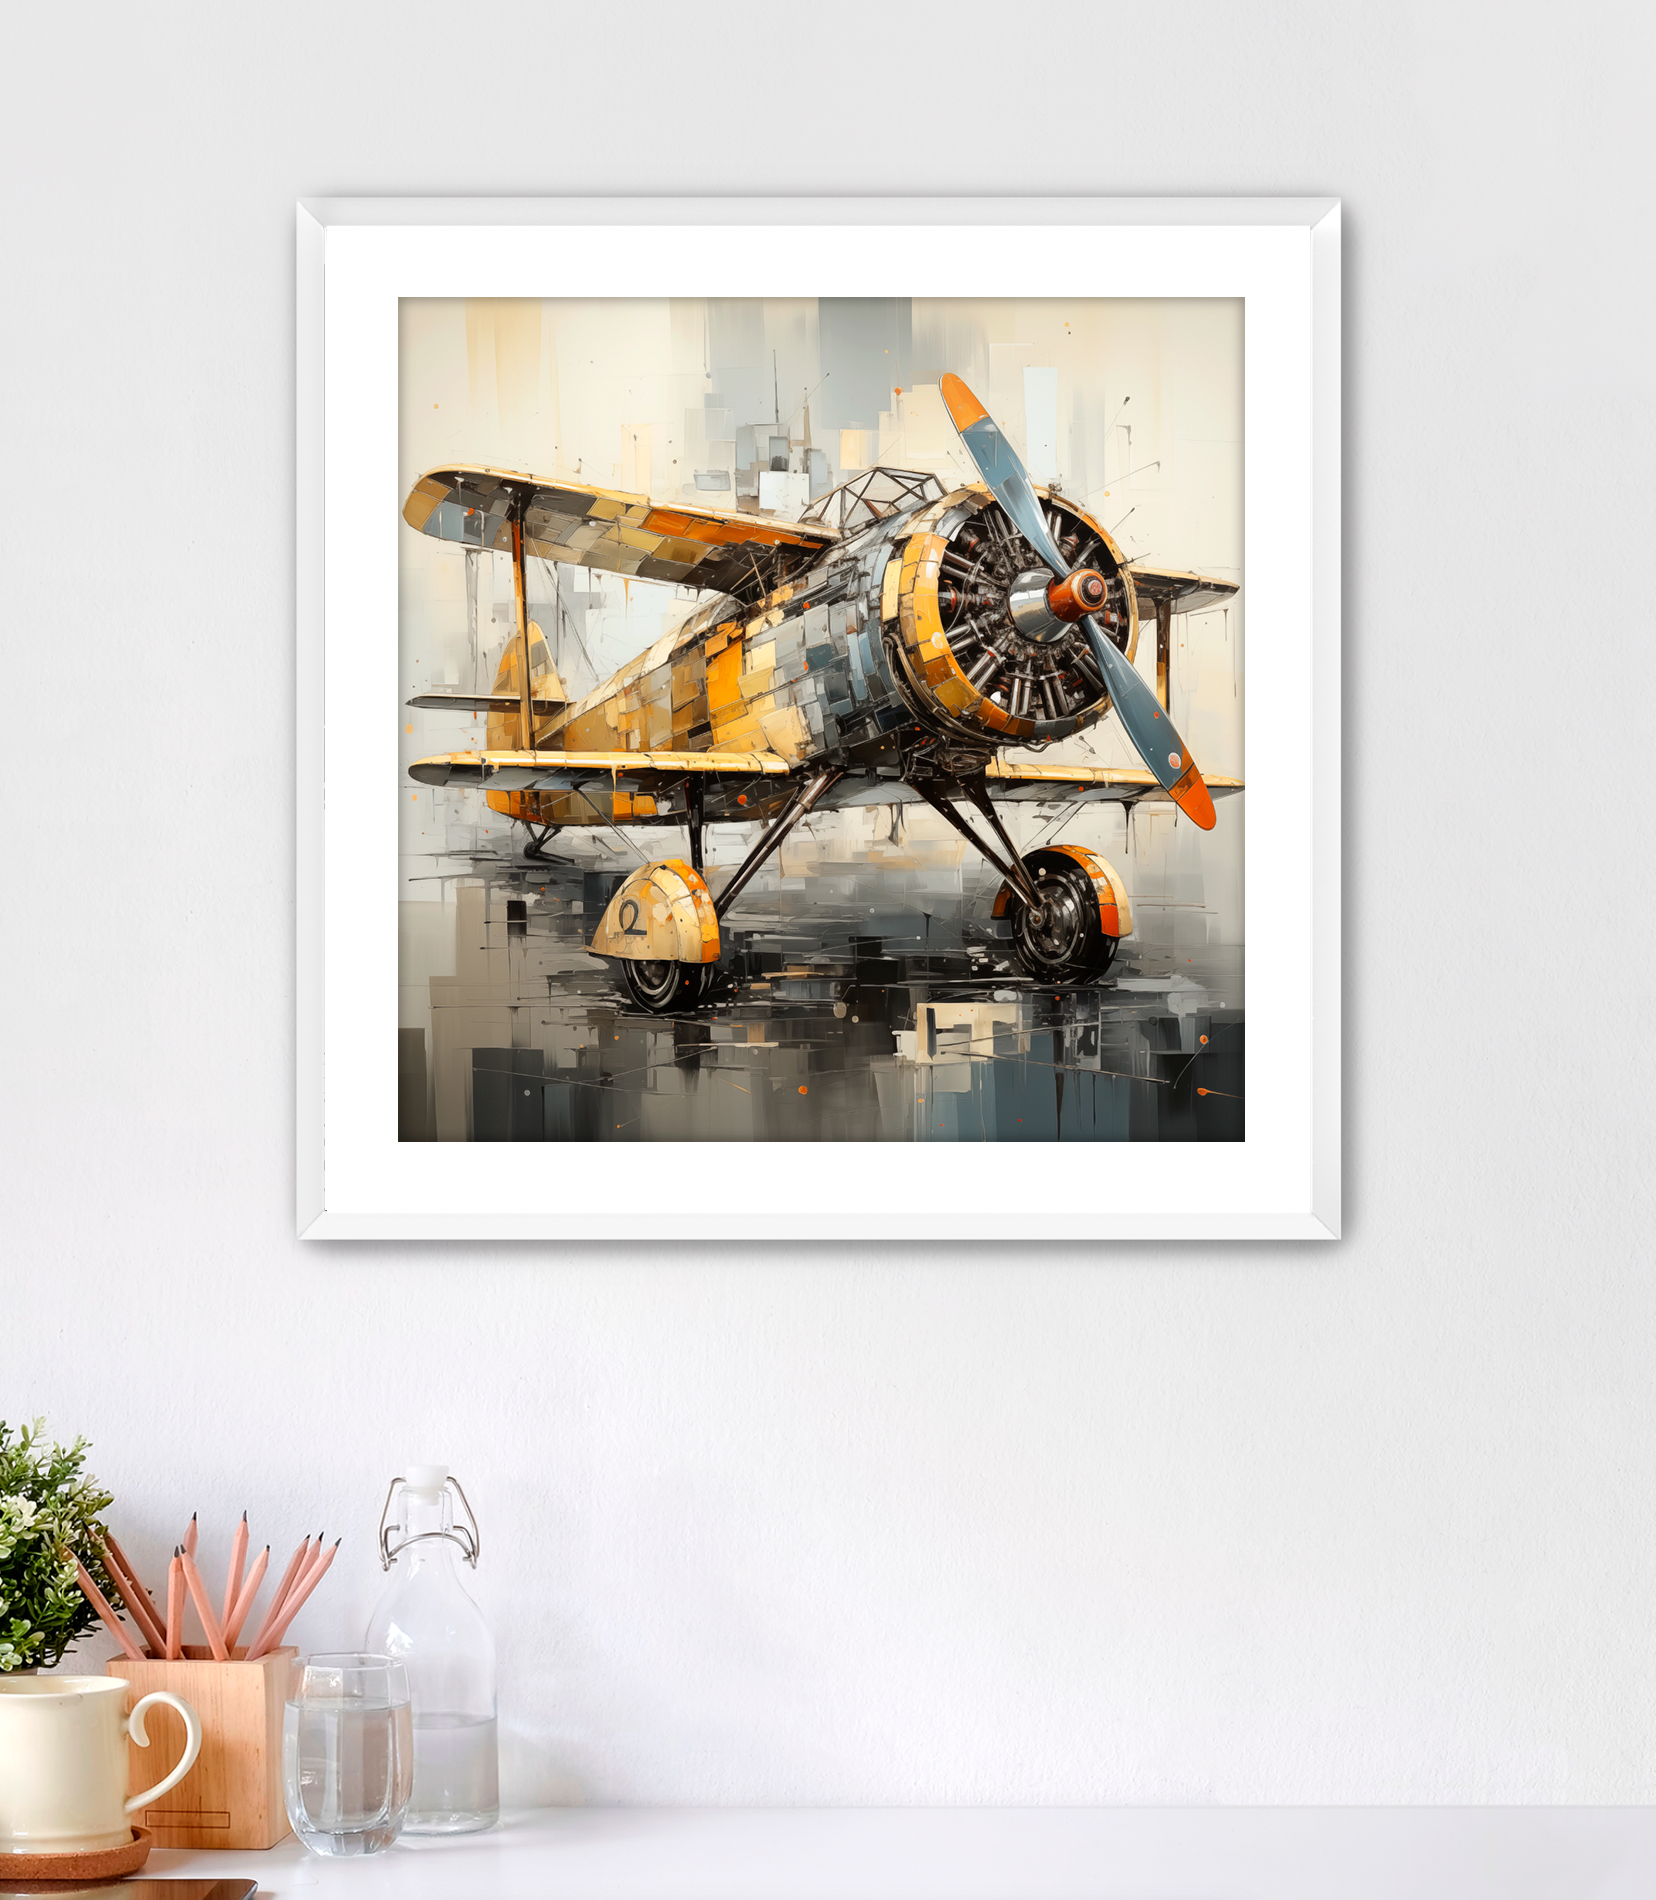 Vintage Abstract Biplane, Vintage aircraft with cubist detail. Subtle neutral color palette with yellow and orange accents. Art includes a white mat and white frame.A perfect piece of artwork for pilots or avaiation enthusiasts. This wall art is for sale at customconcepts.art